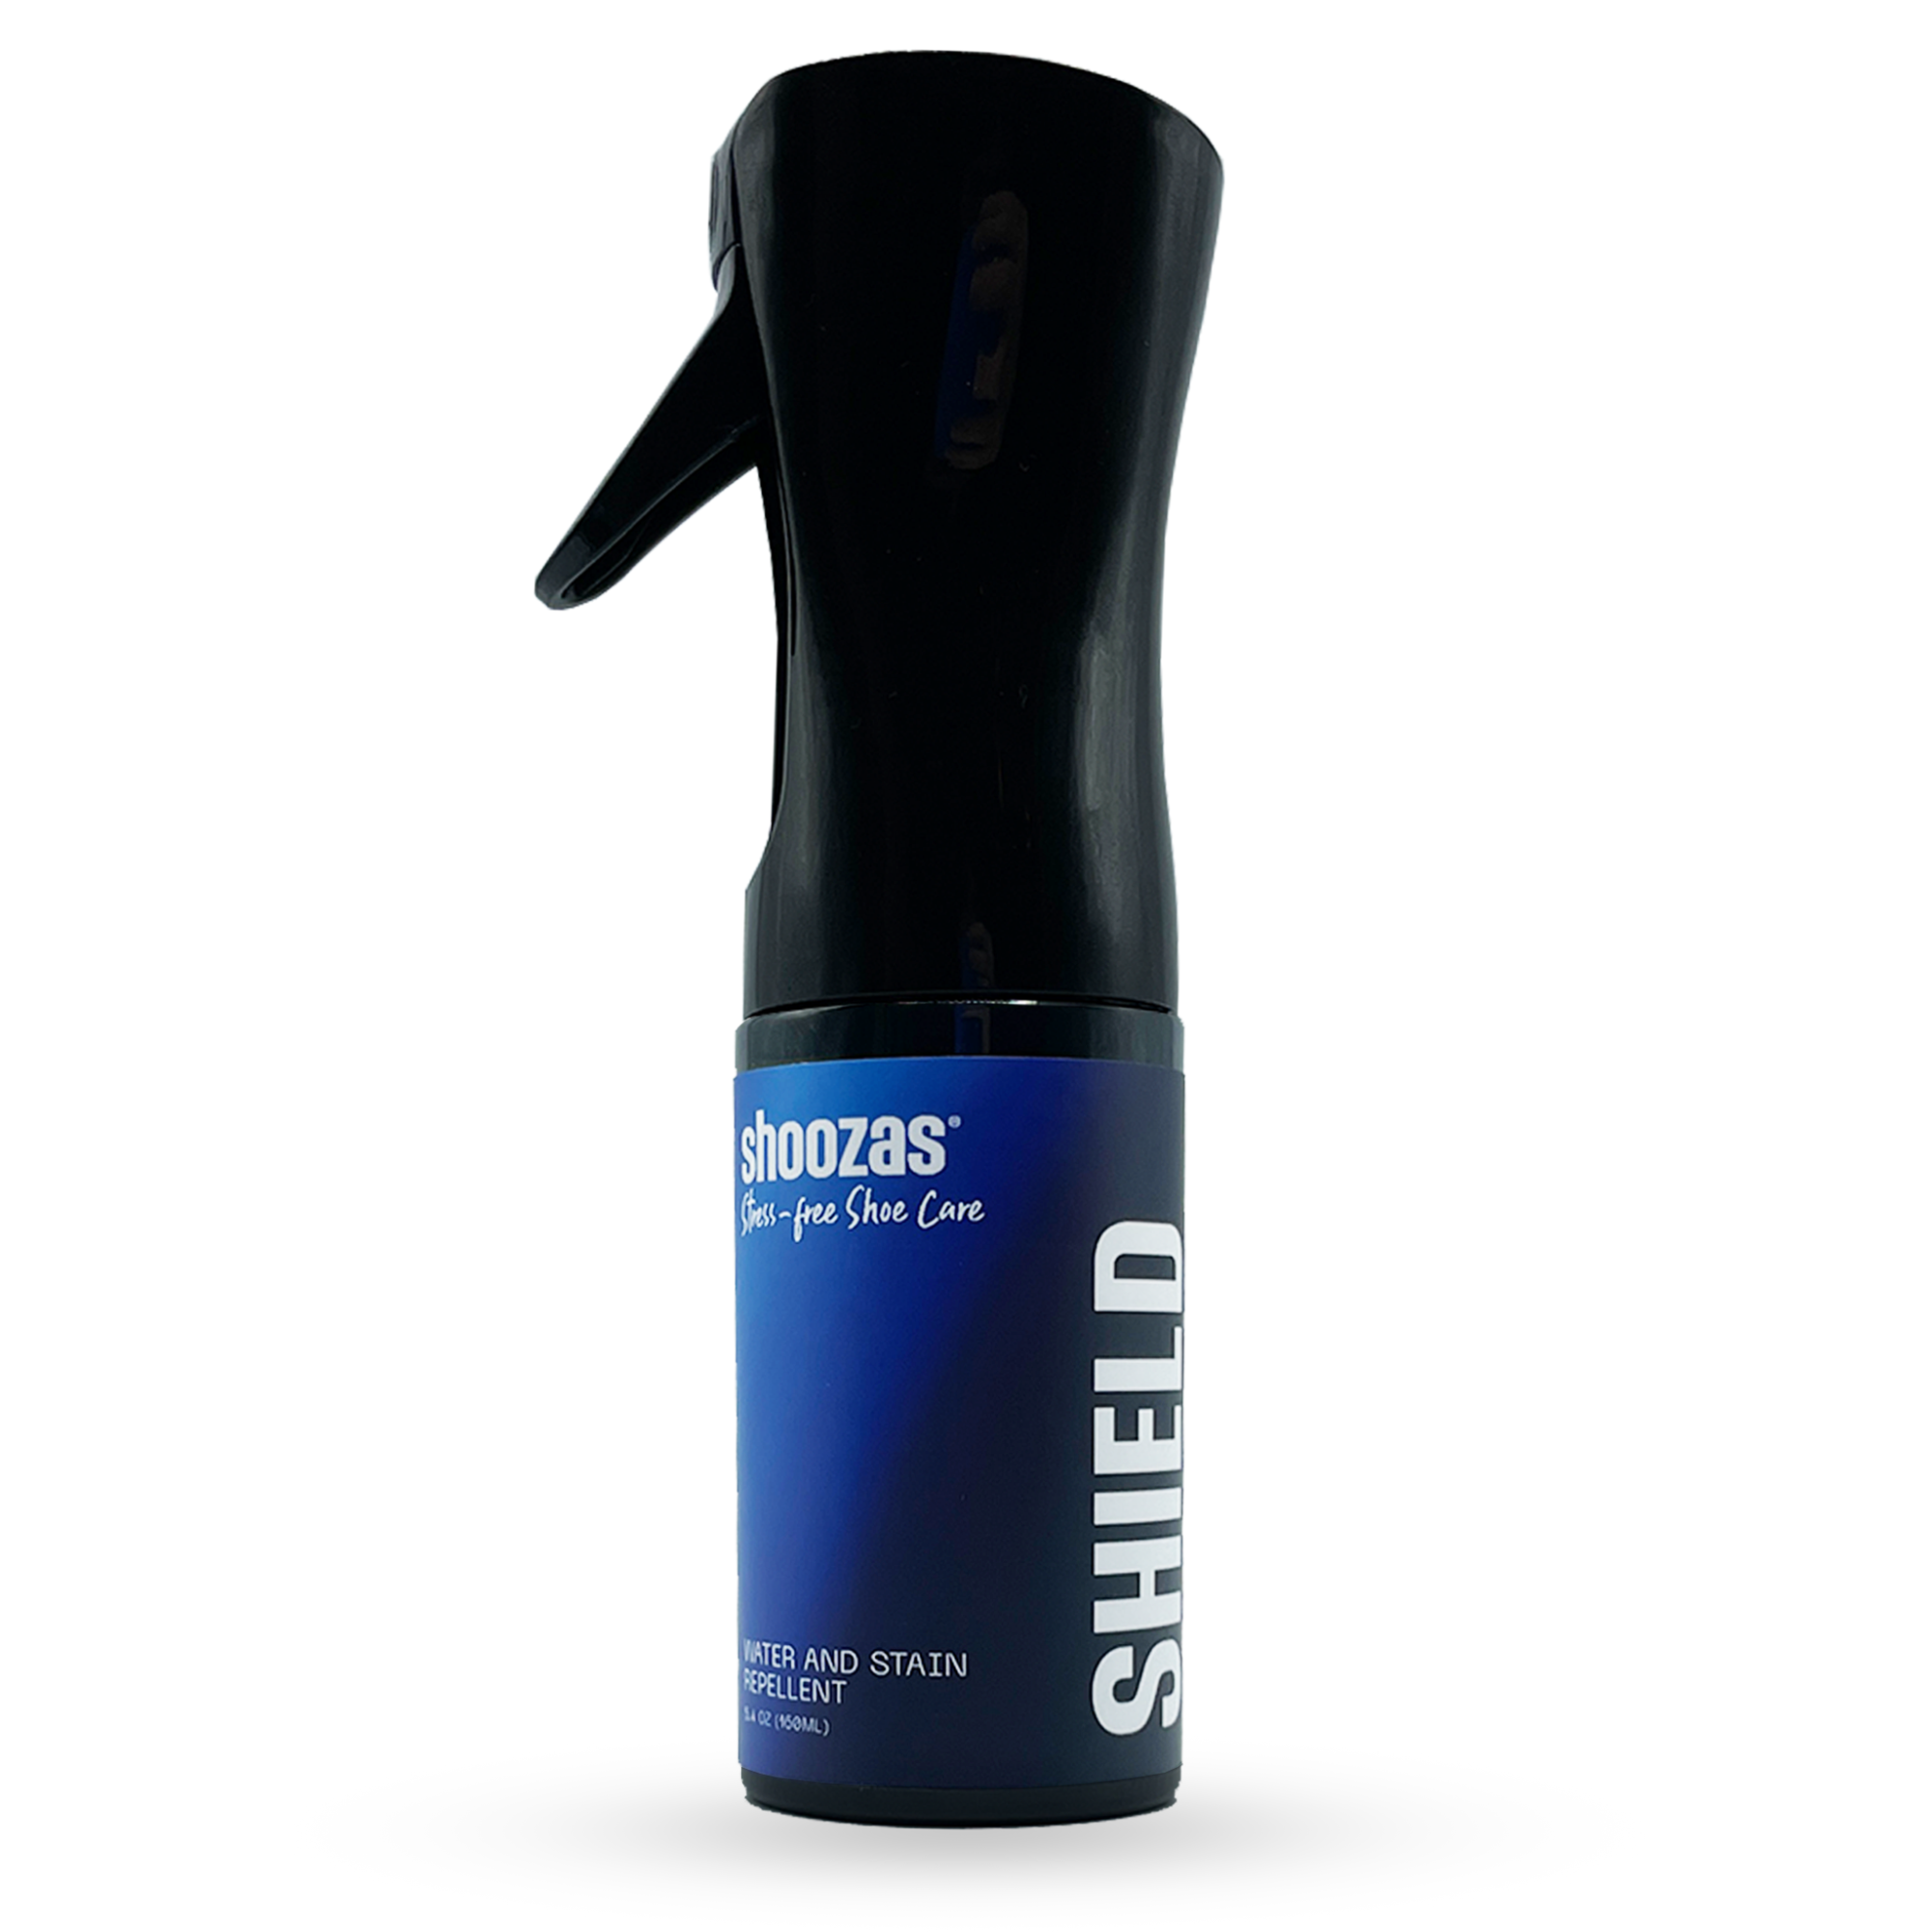 NEW Water & Stain Repellent Spray (5.4 Oz.)